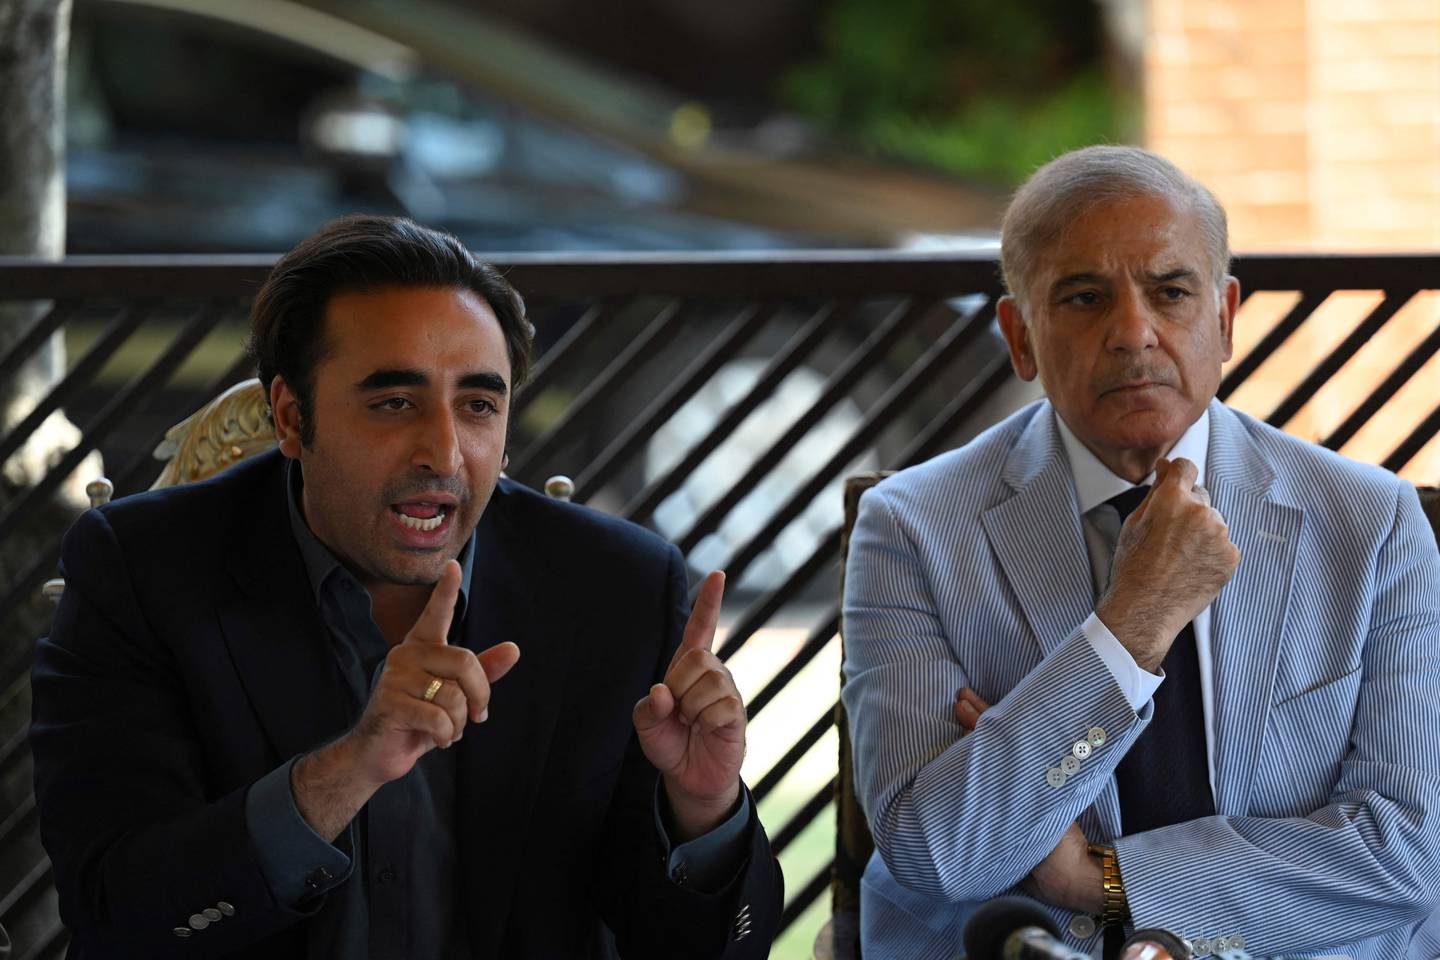 Pakistan's opposition leaders Bilawal Bhutto Zardari, left, and Shehbaz Sharif in Islamabad last week. The Bhutto and Sharif dynasties have been united in recent years. AFP